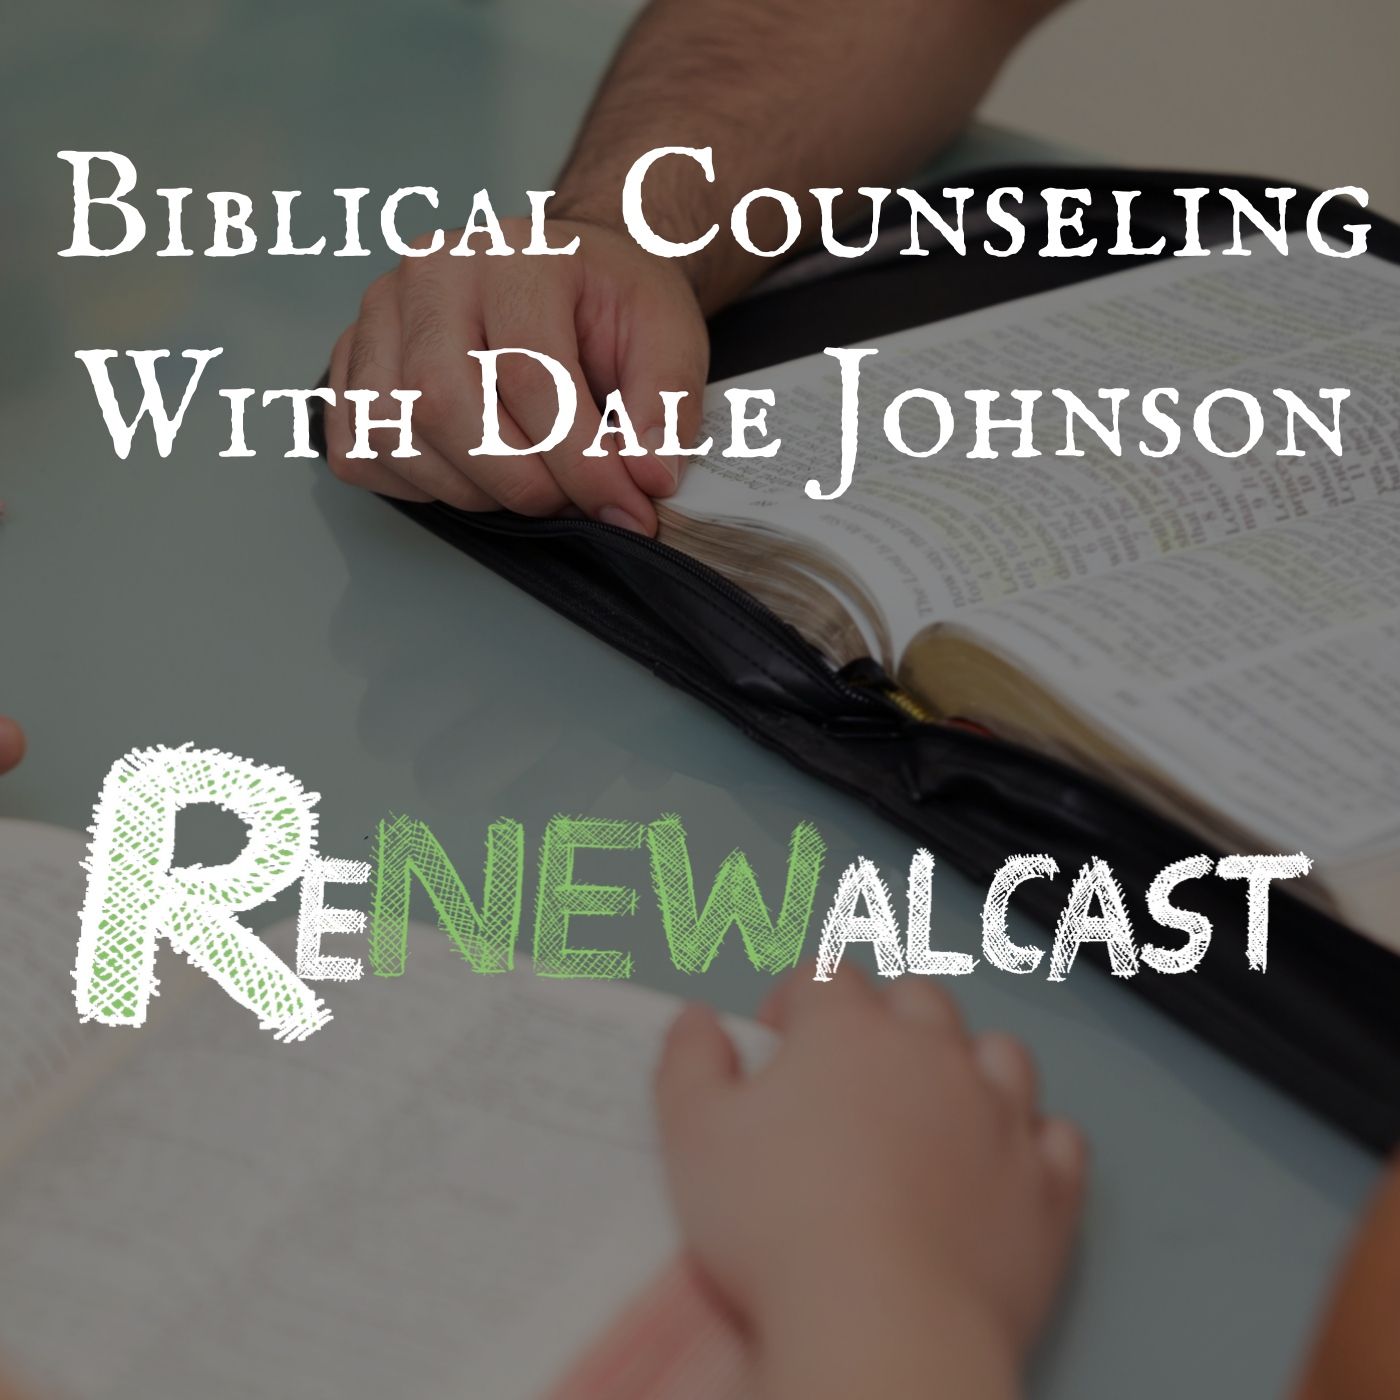 Biblical Counseling With Dale Johnson